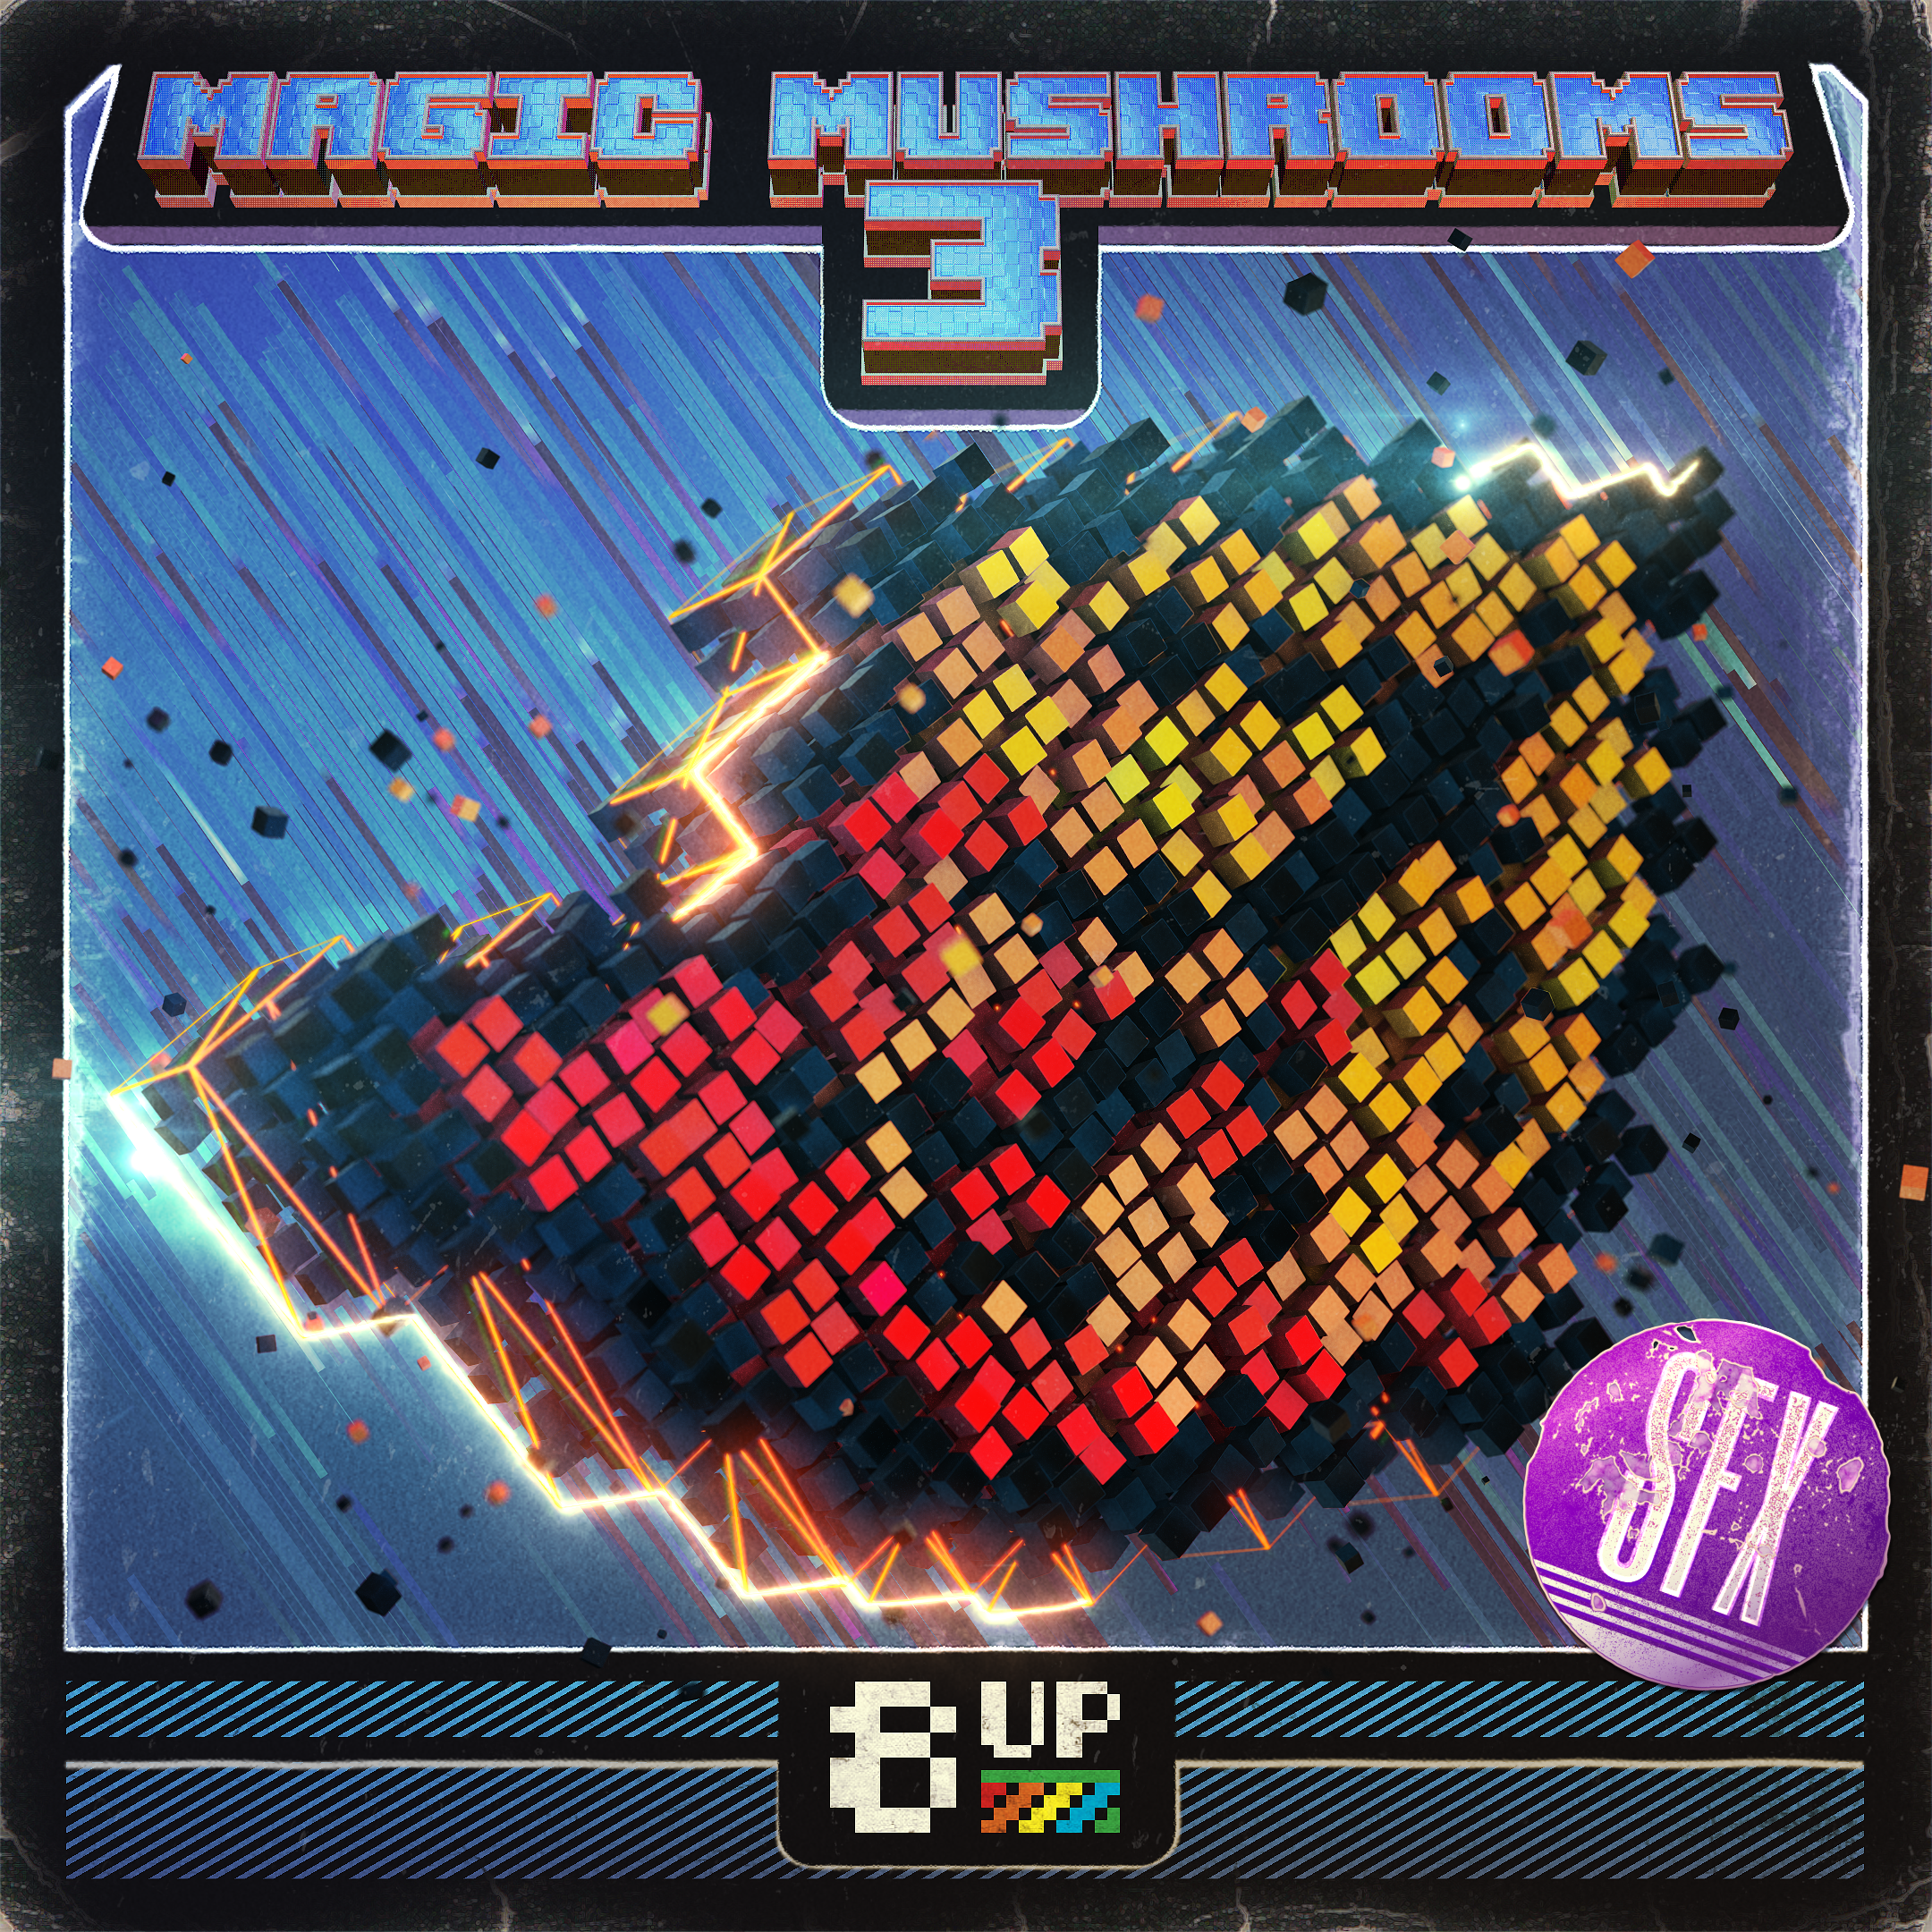 Magic Mushrooms 3 Sound Effects Packshot by 8UP